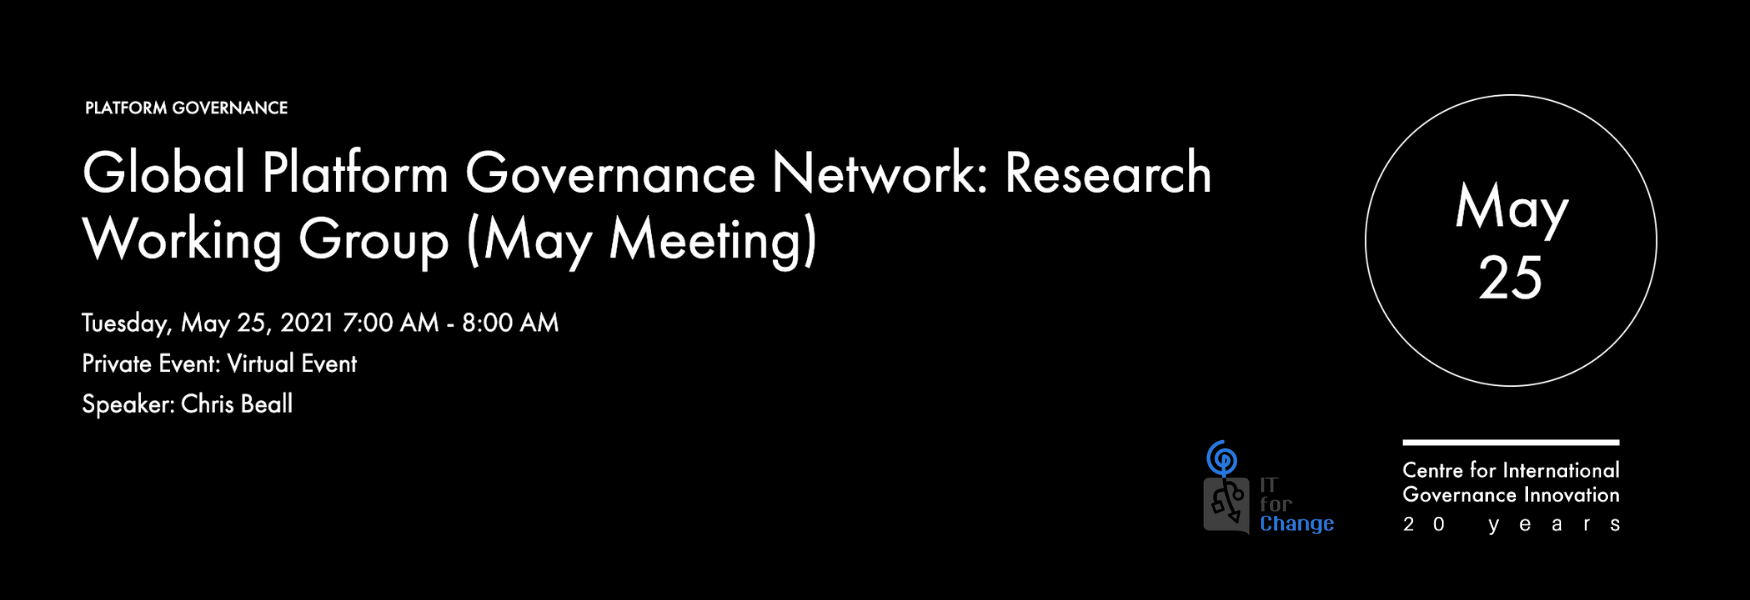 Global Platform Governance Network: Research Working Group (May Meeting)